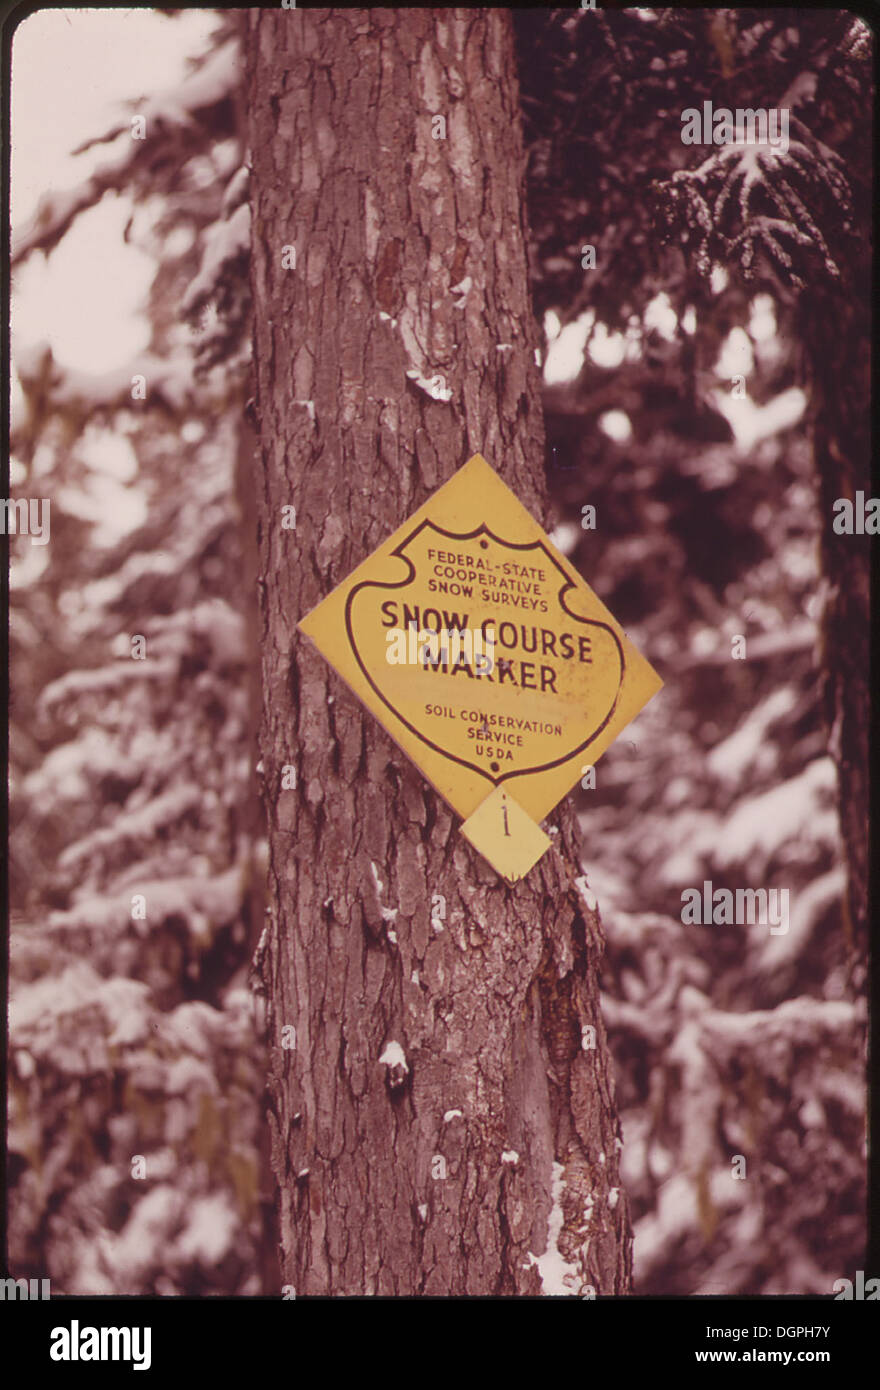 SOIL CONSERVATION SERVICE SIGN AT TILLY JANE CAMPGROUND ON MT. HOOD. FEDERAL AND STATE COOPERATIVE SNOW SURVEYS ARE... 548159 Stock Photo